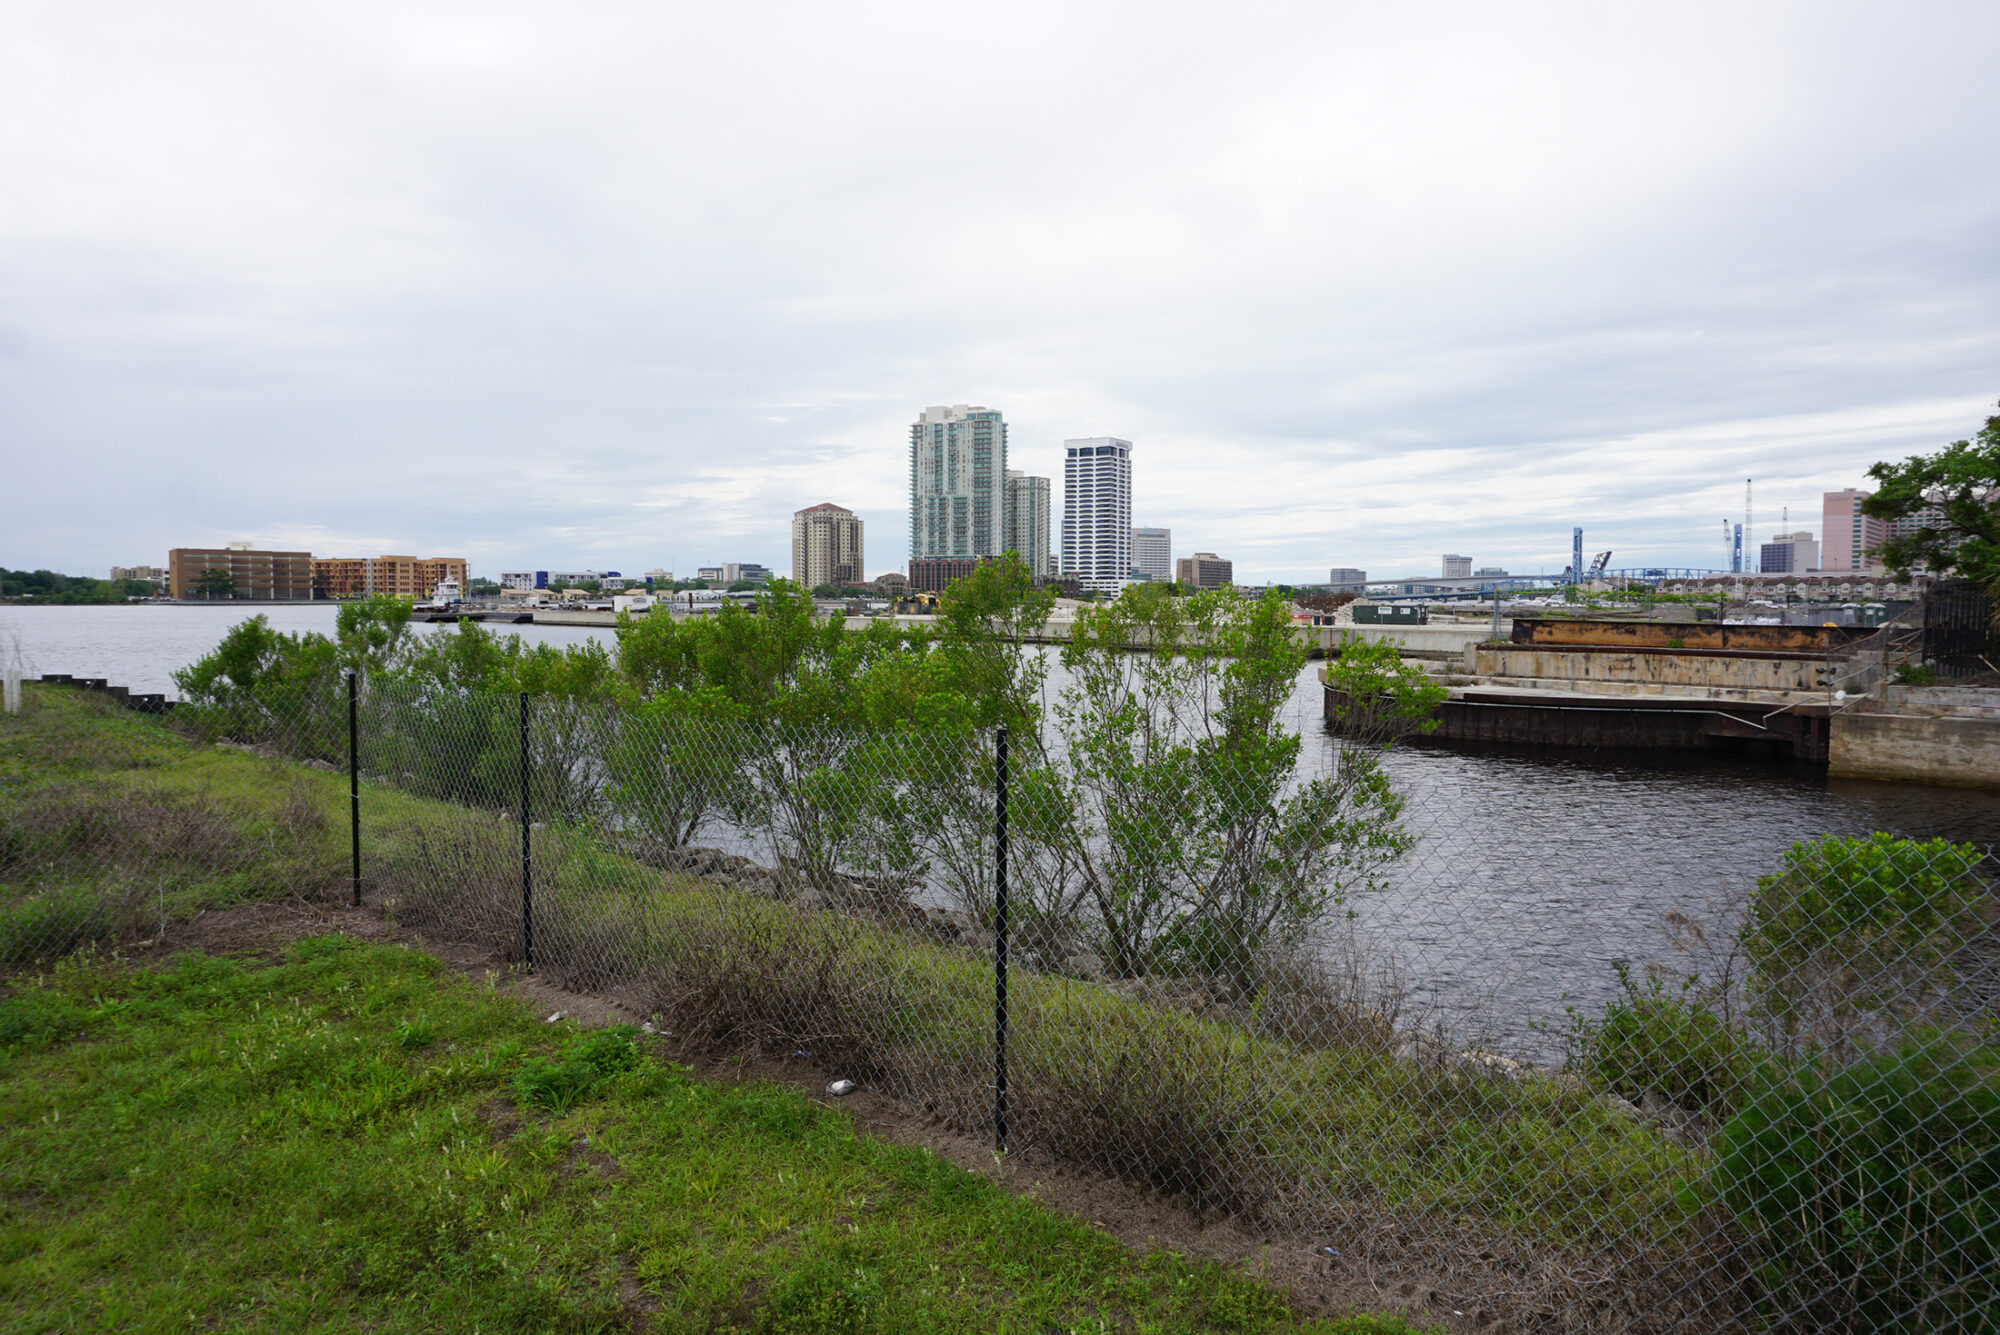 Current Hogans Creek outflow to the St. Johns River at the Shipyards